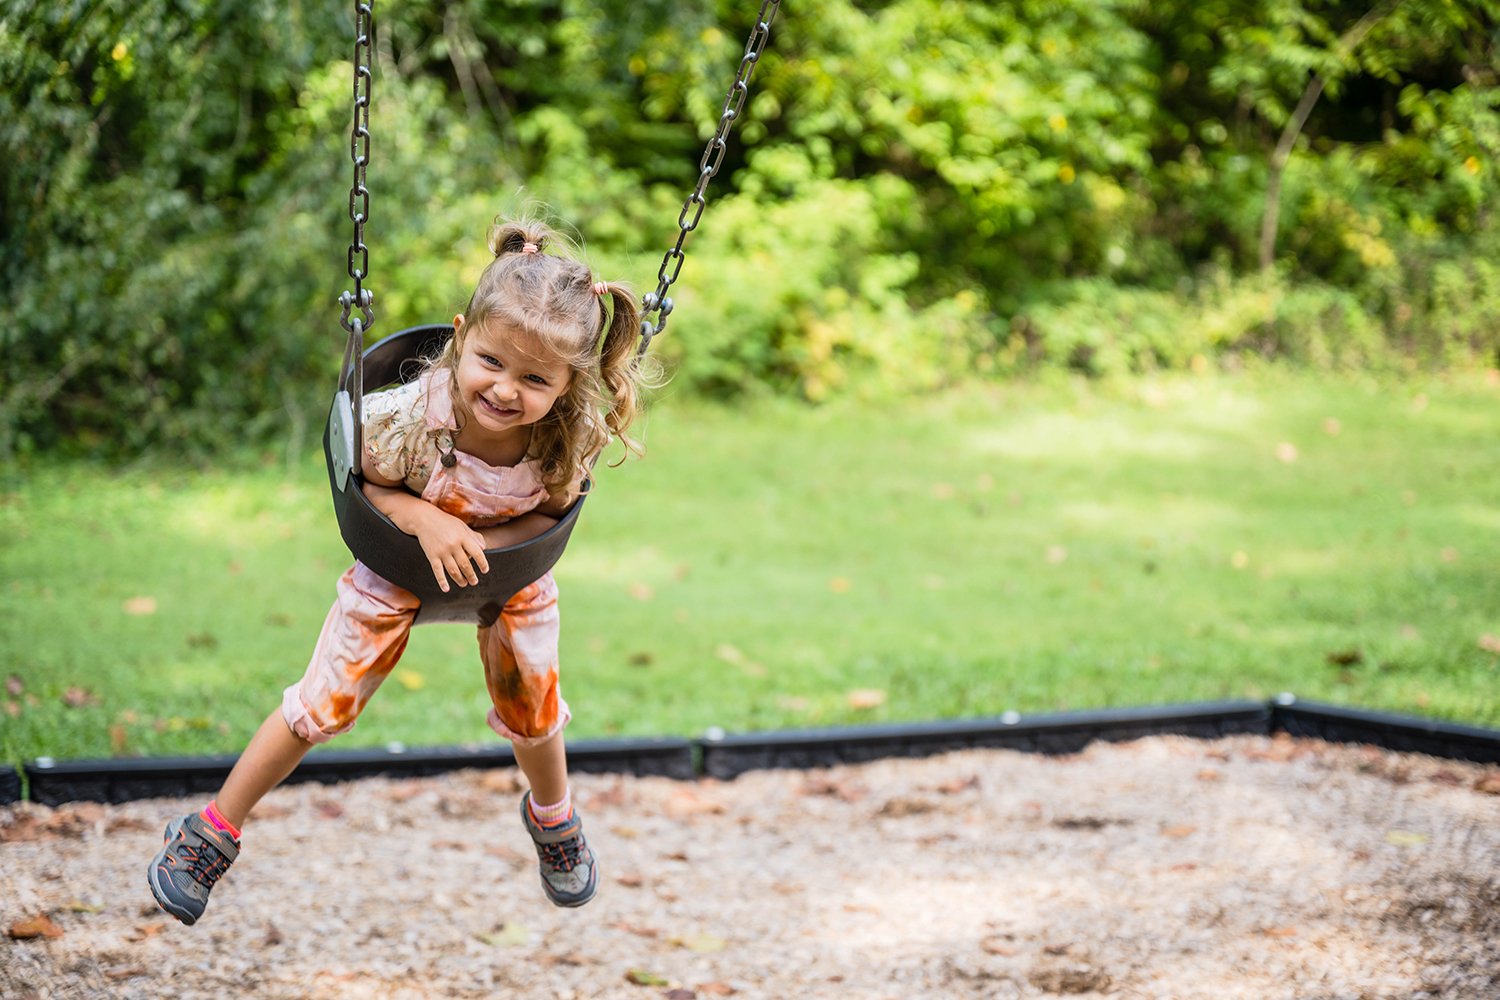 A toddler in a swing smiles as she is pushed into the air.